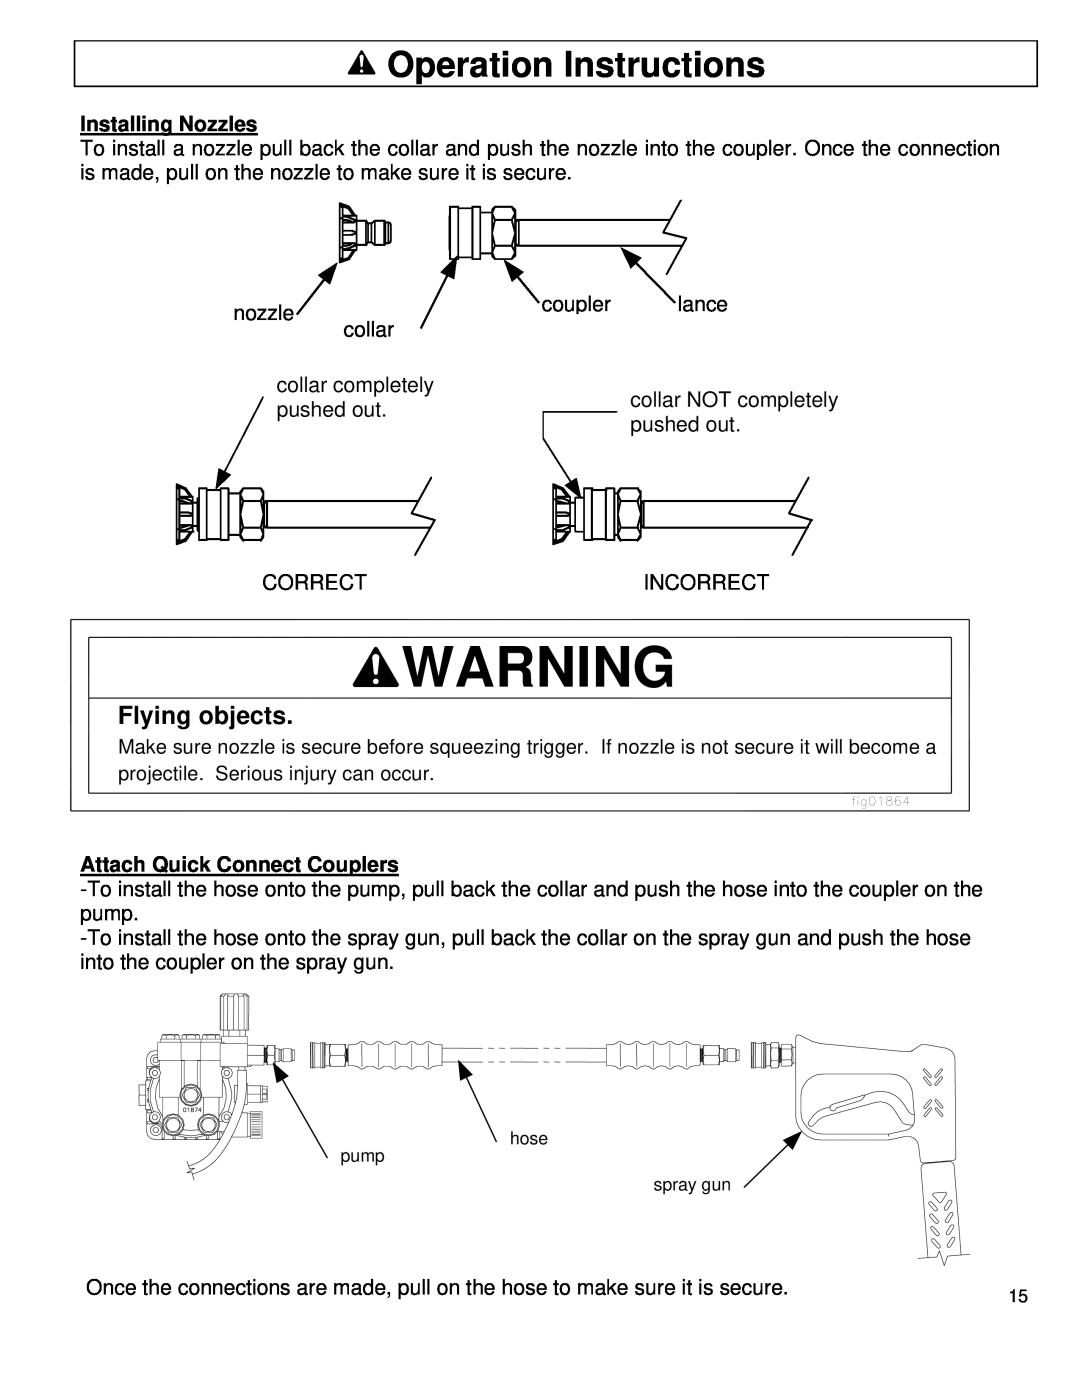 North Star M1578111F owner manual Operation Instructions, Flying objects, Installing Nozzles, Attach Quick Connect Couplers 